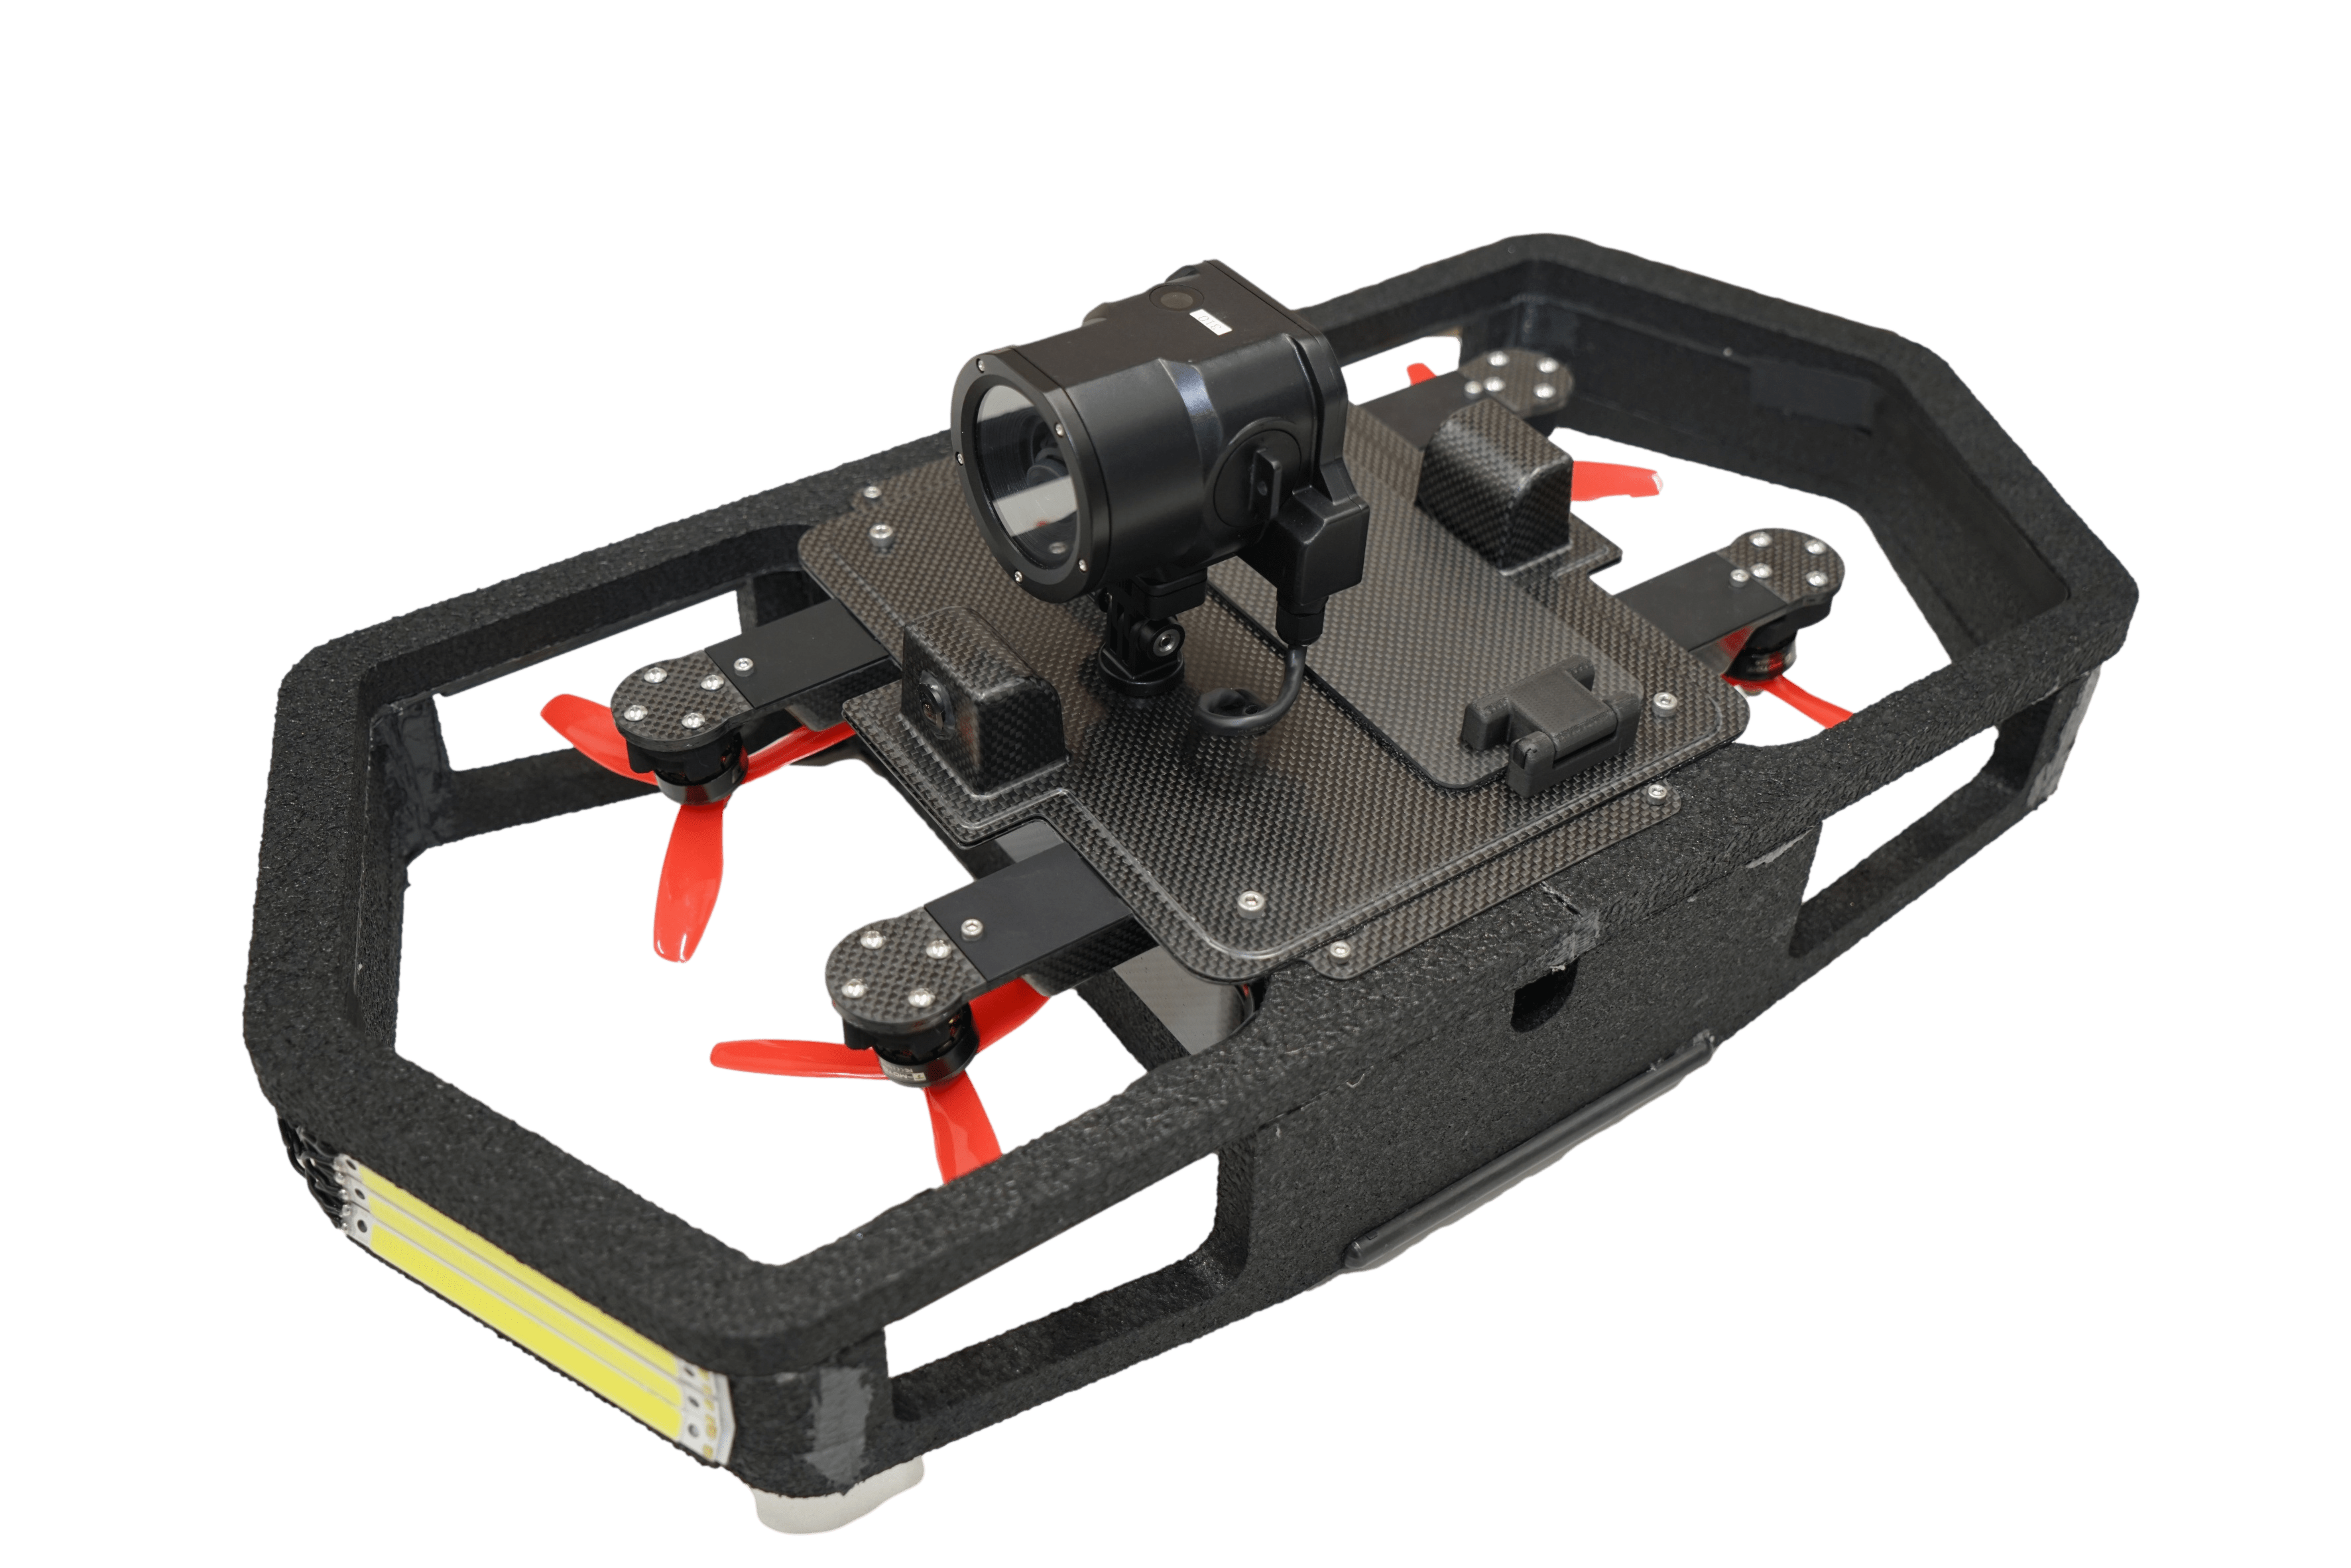 Fi4: Inspection Drone for Confined Spaces